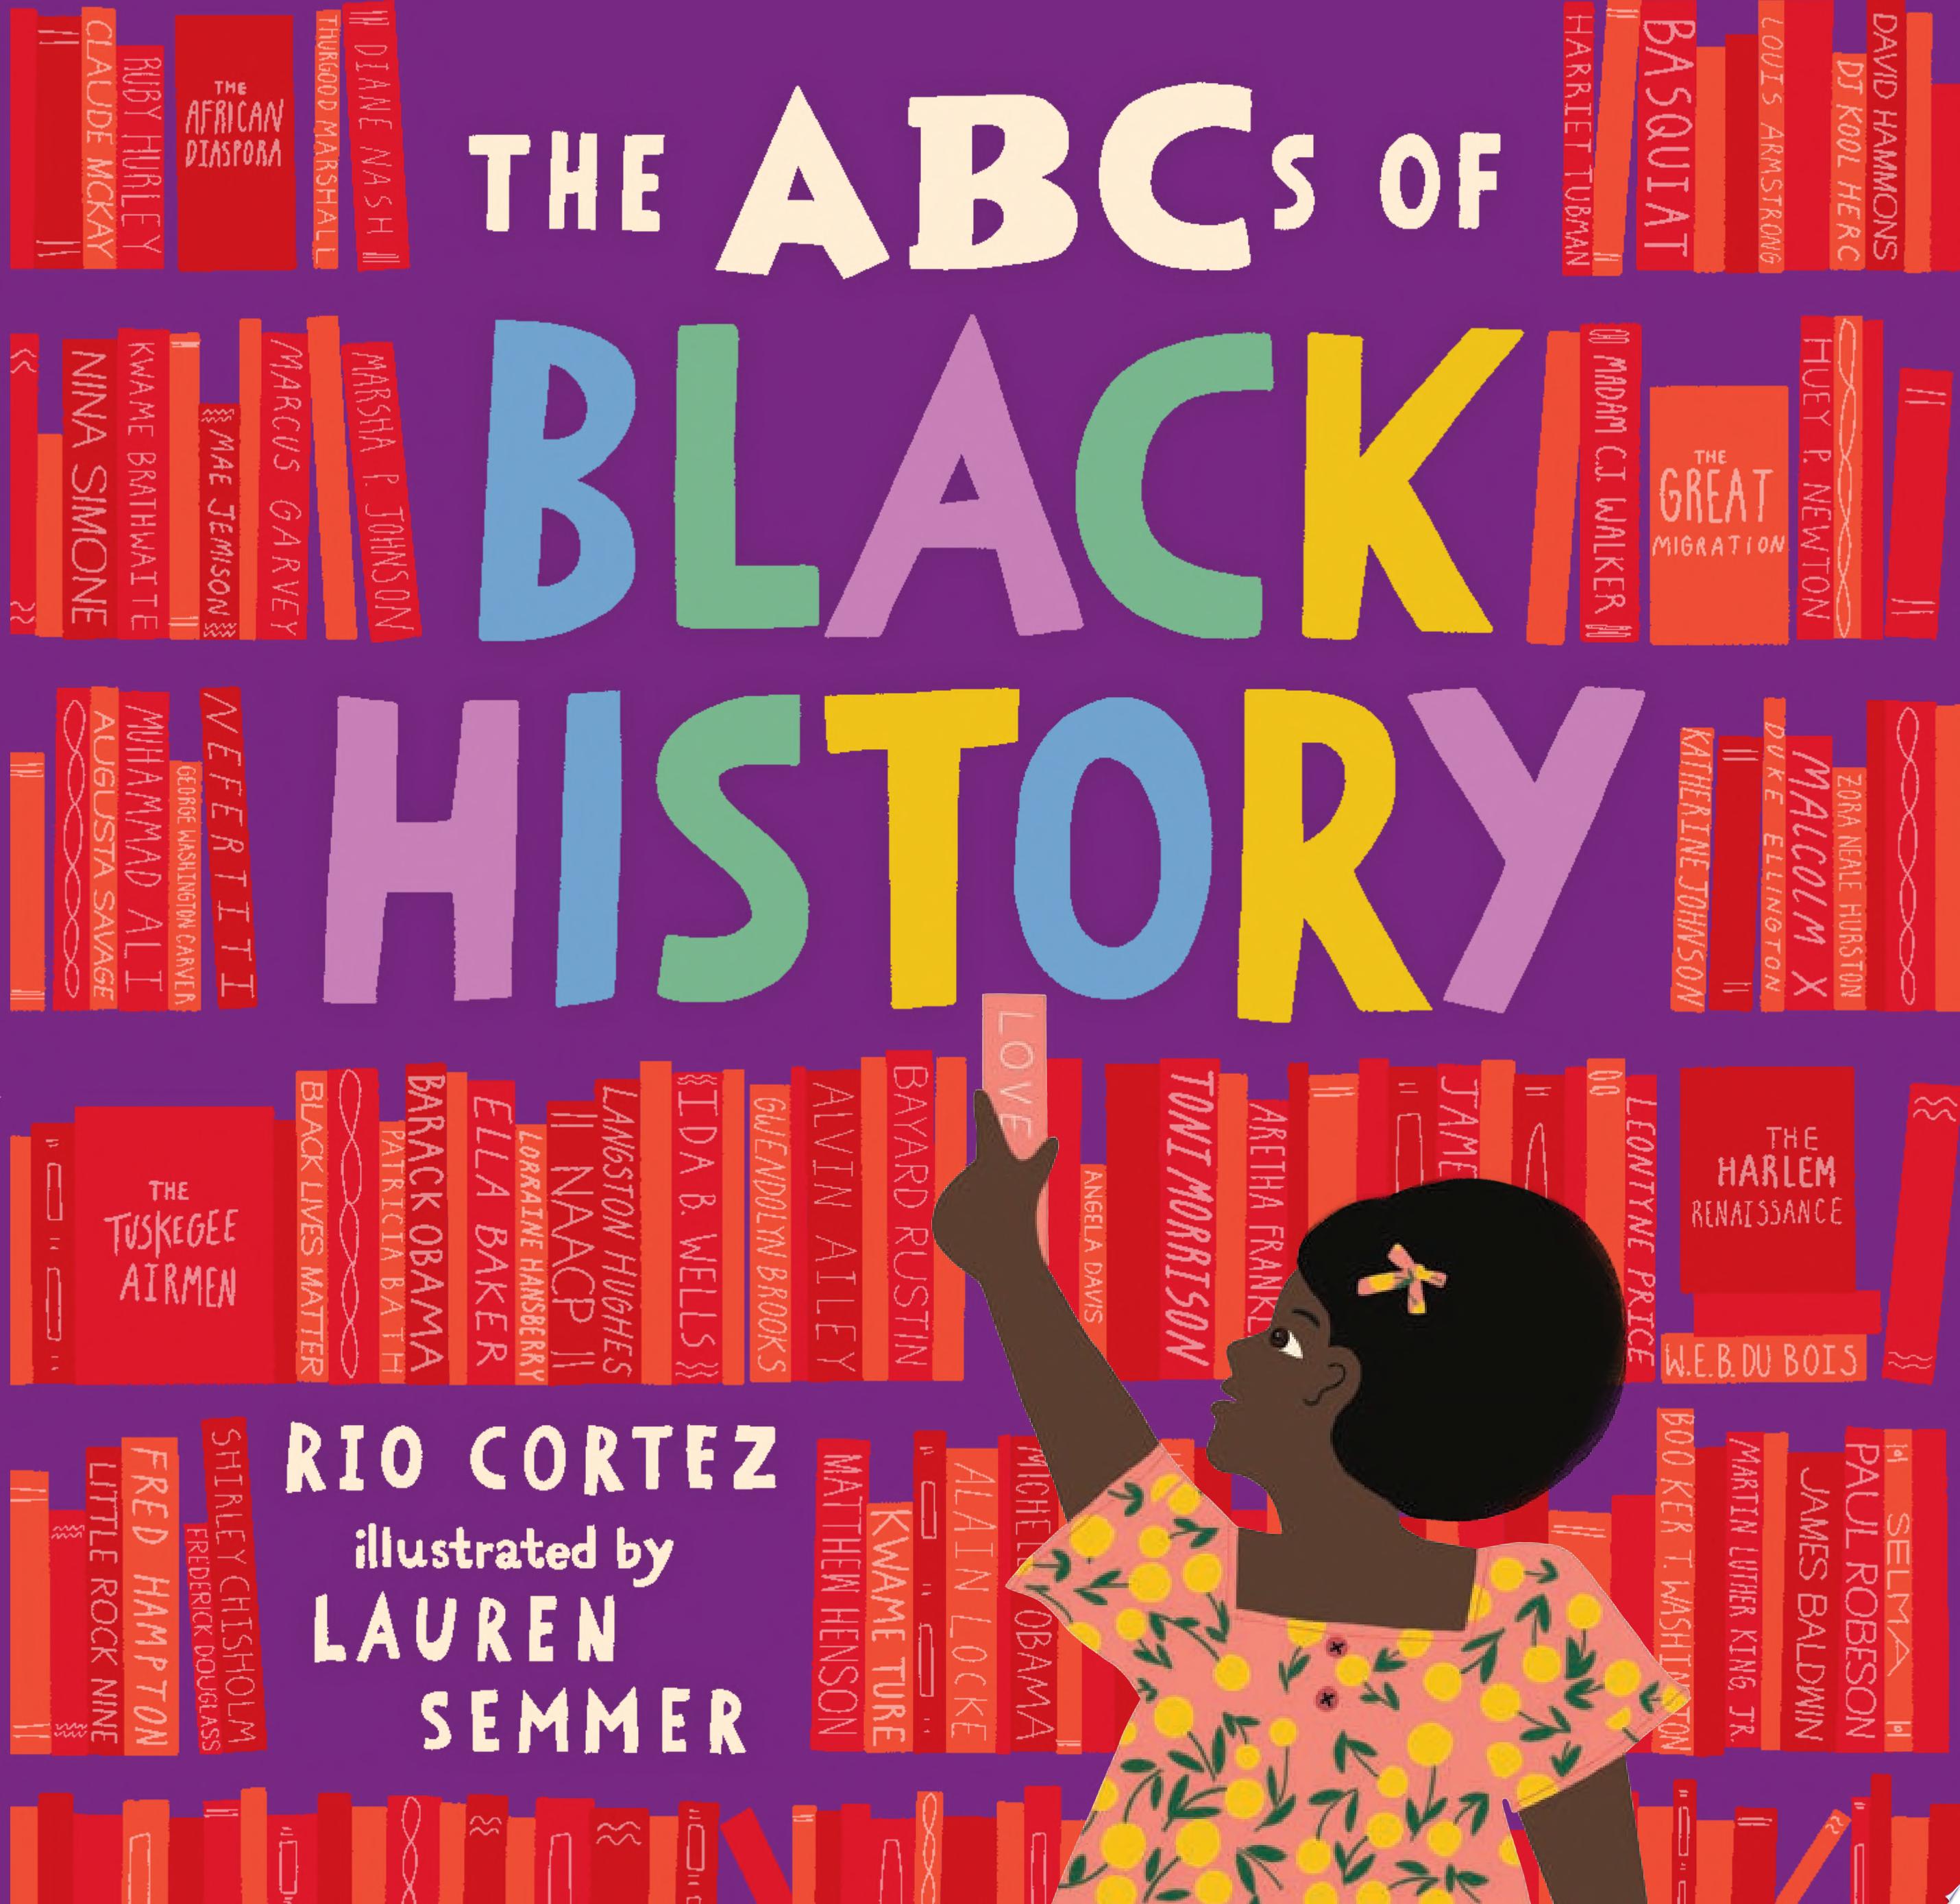 Image for "The ABCs of Black History"